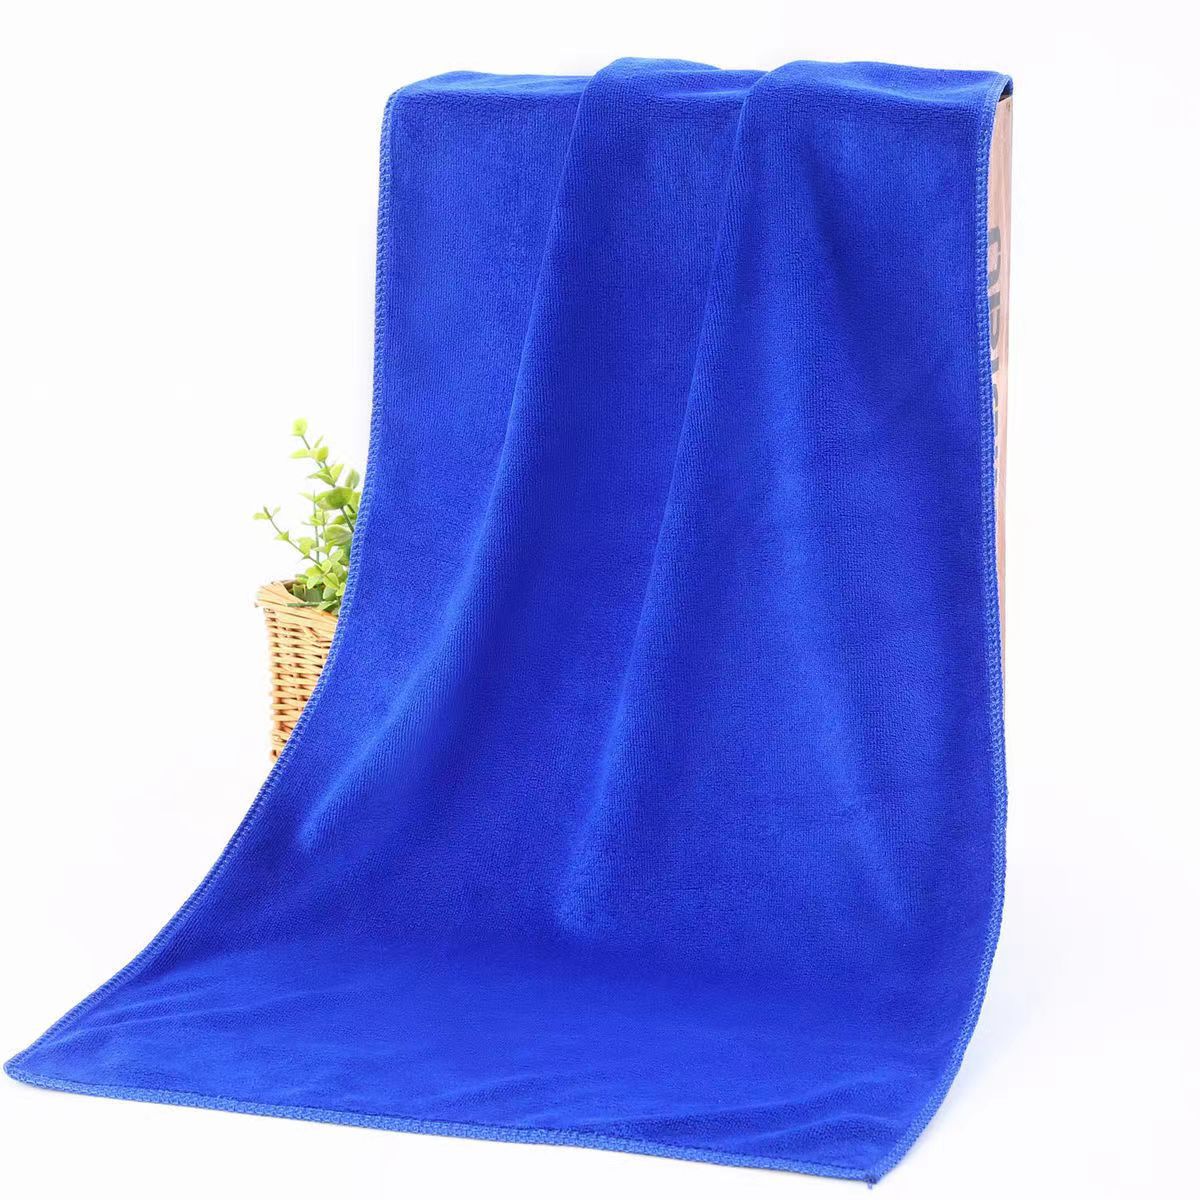 Large Thickened Car Towel Microfiber Towel Absorbent Lint-Free Housekeeping Restaurant Kitchen Multi-Purpose